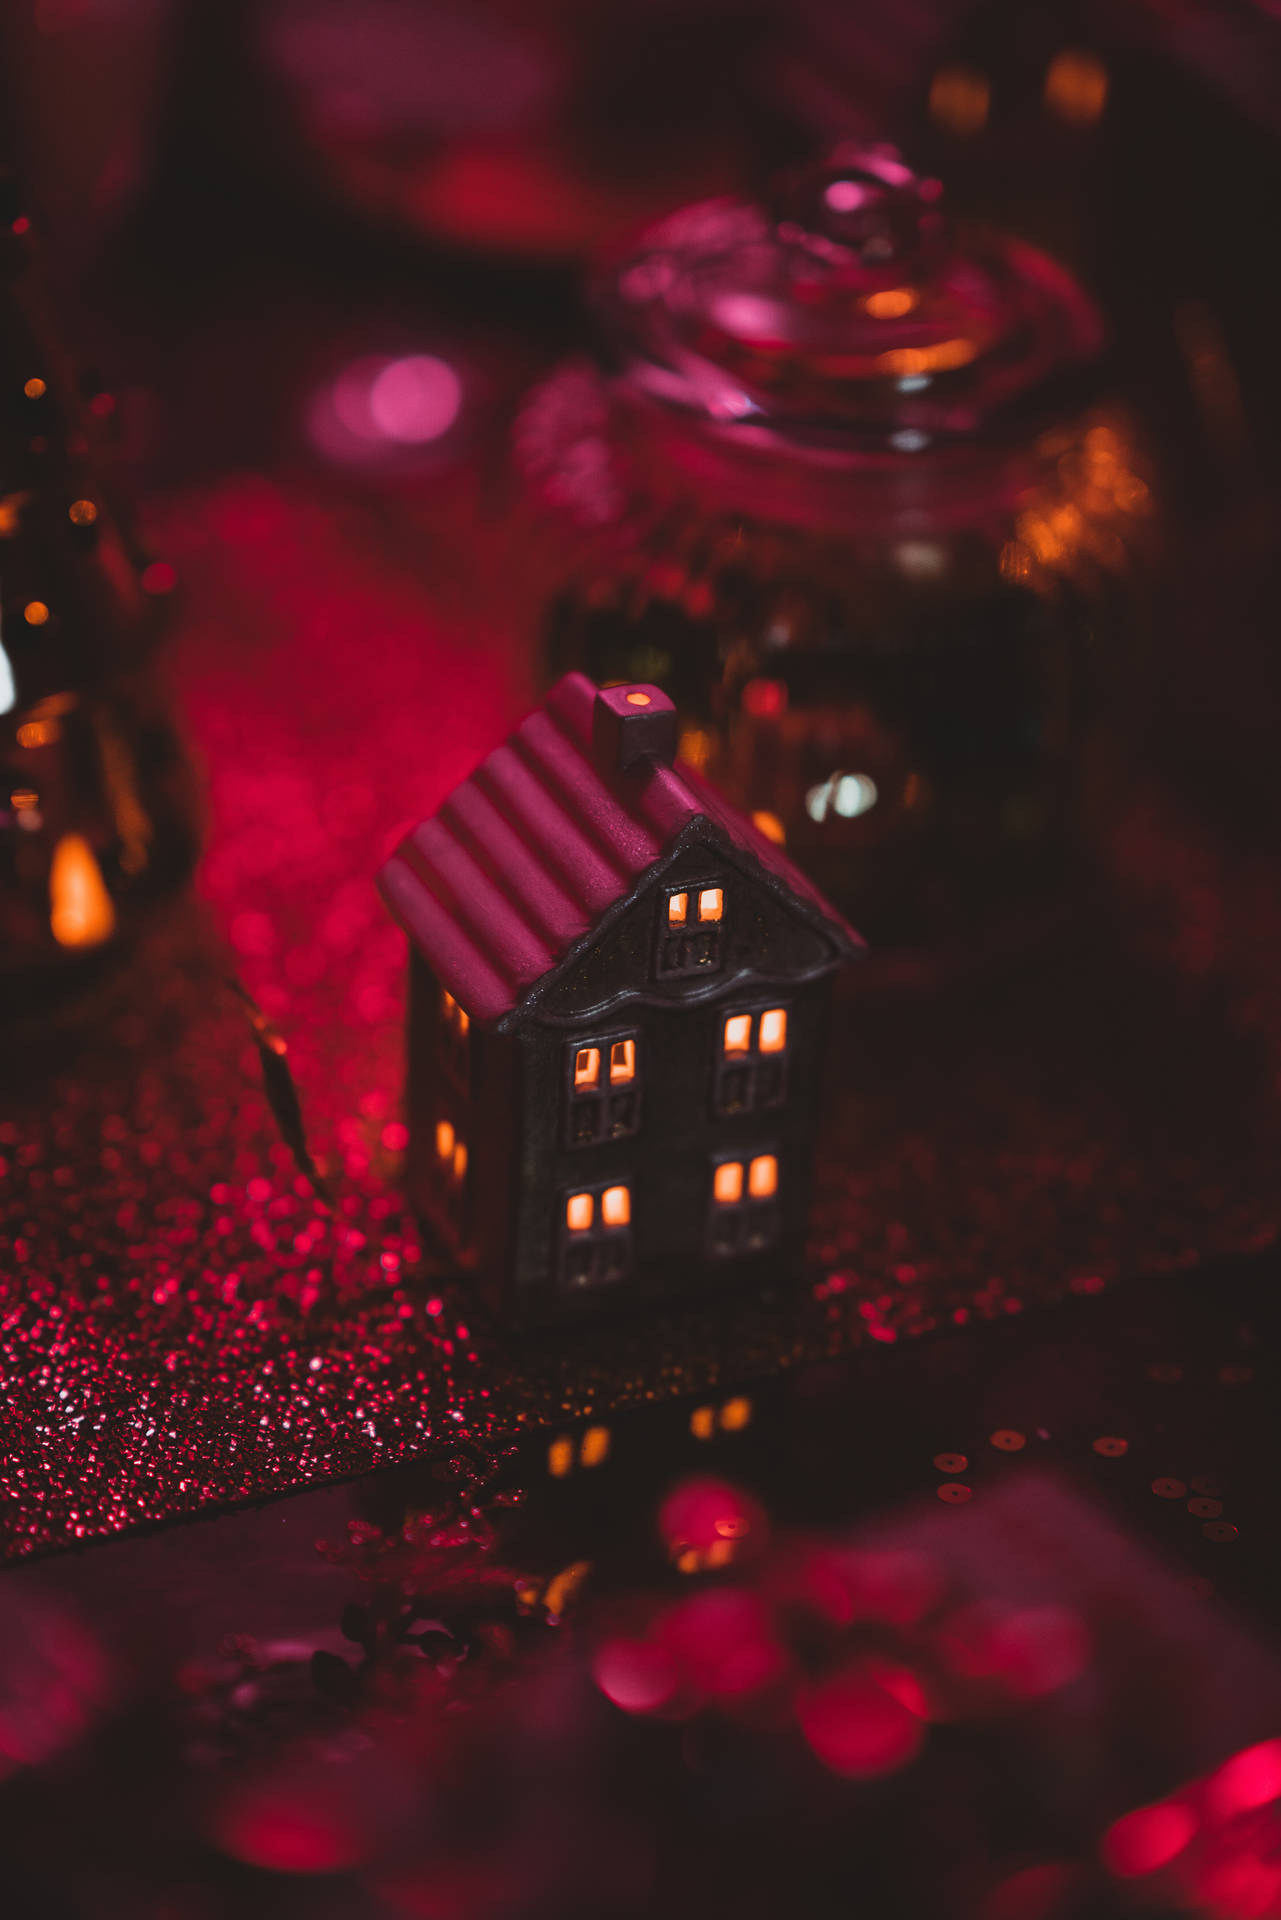 Celebrate Christmas with a cozy toy house adorned in red Christmas lights Wallpaper